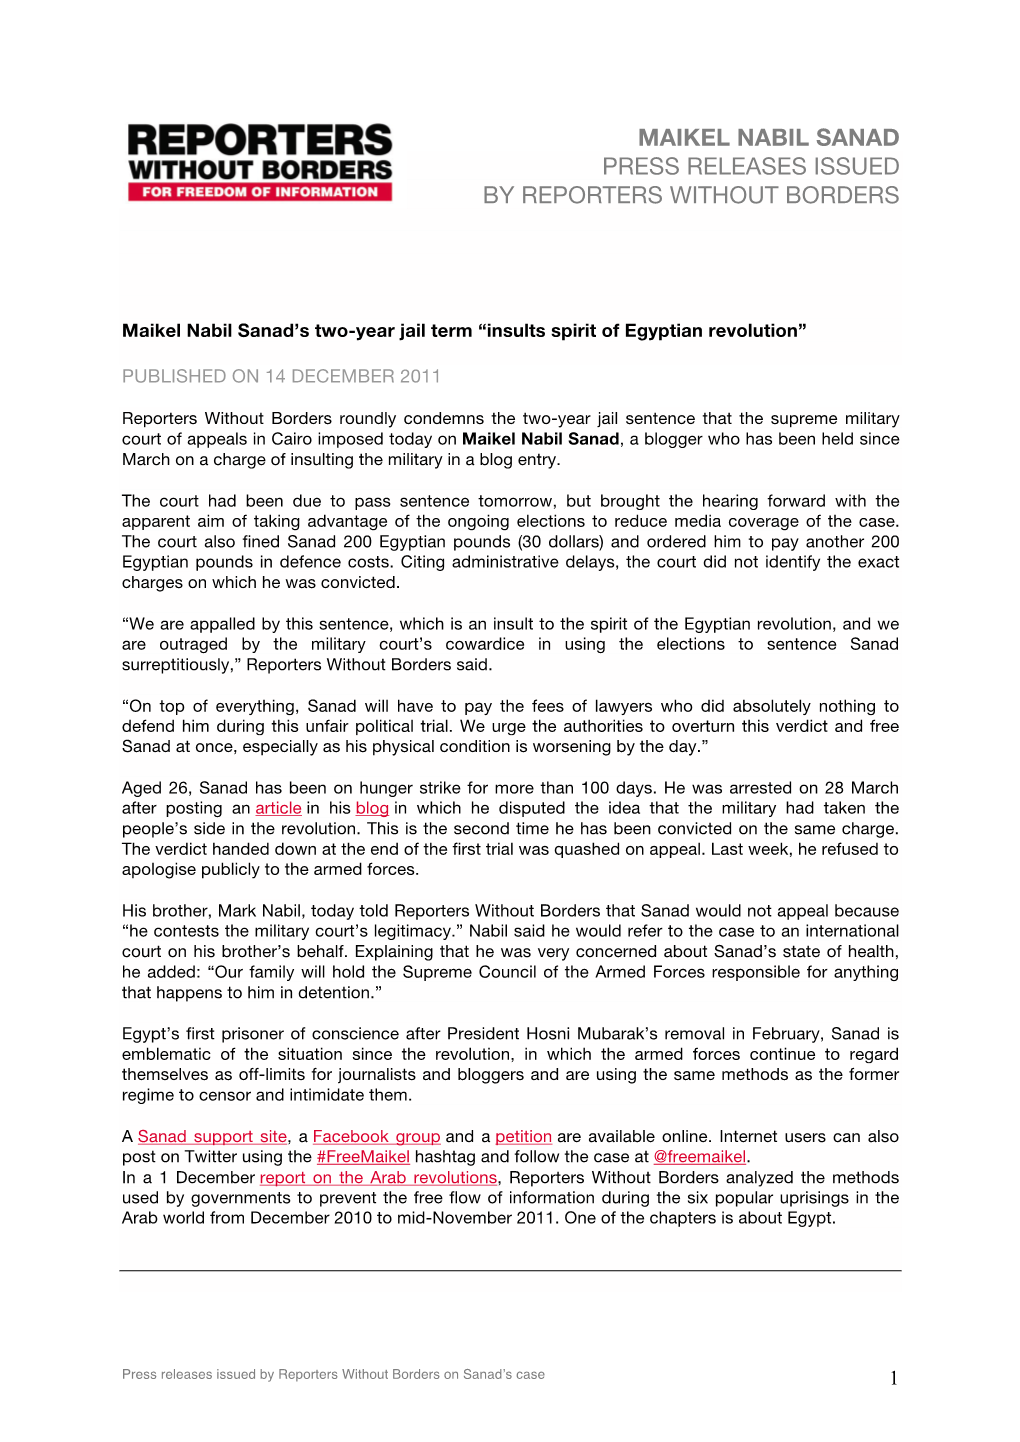 Maikel Nabil Sanad Press Releases Issued by Reporters Without Borders